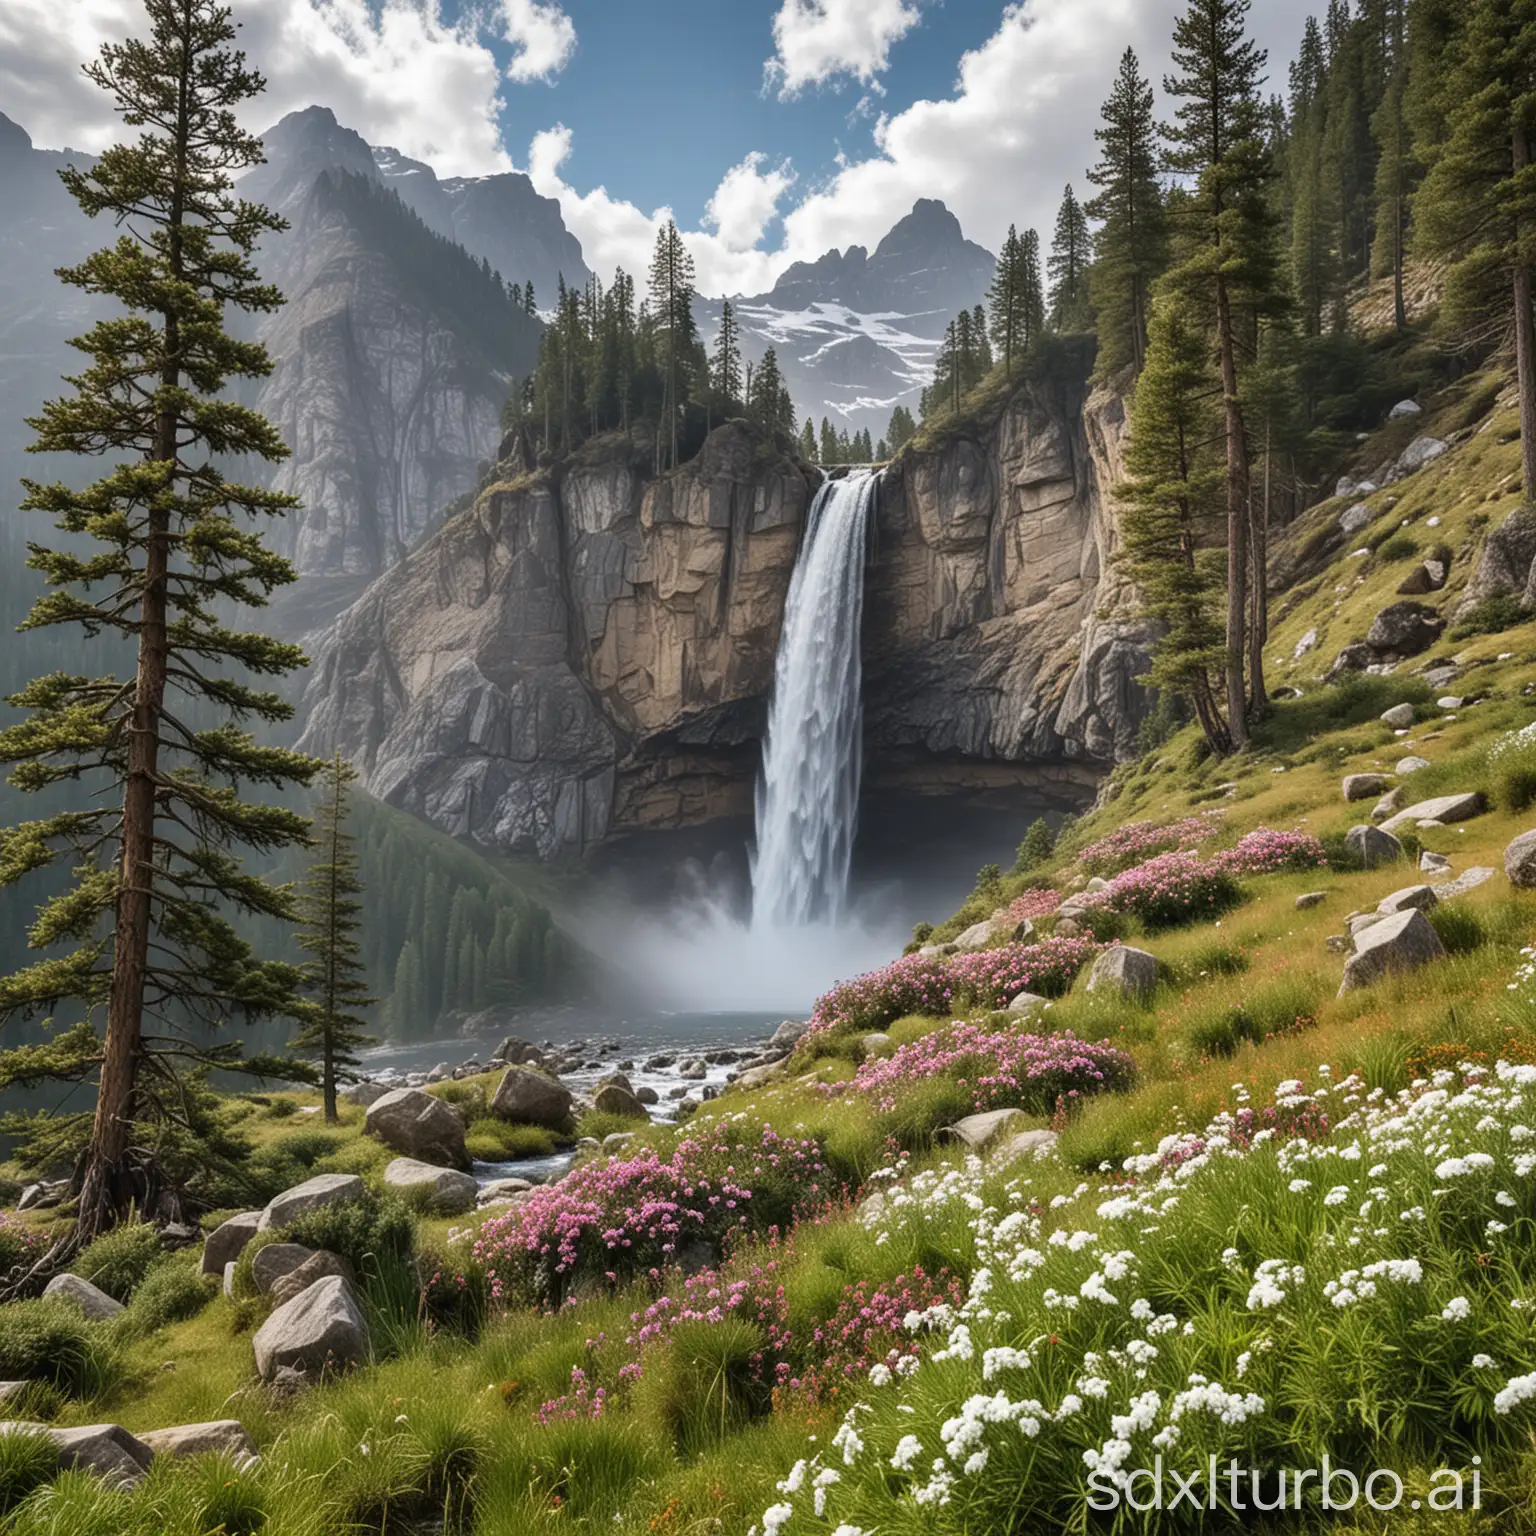 Open-air landscape, incredible waterfall, a mountain with a little snow in the distance, some pine trees, landscape with some flowers